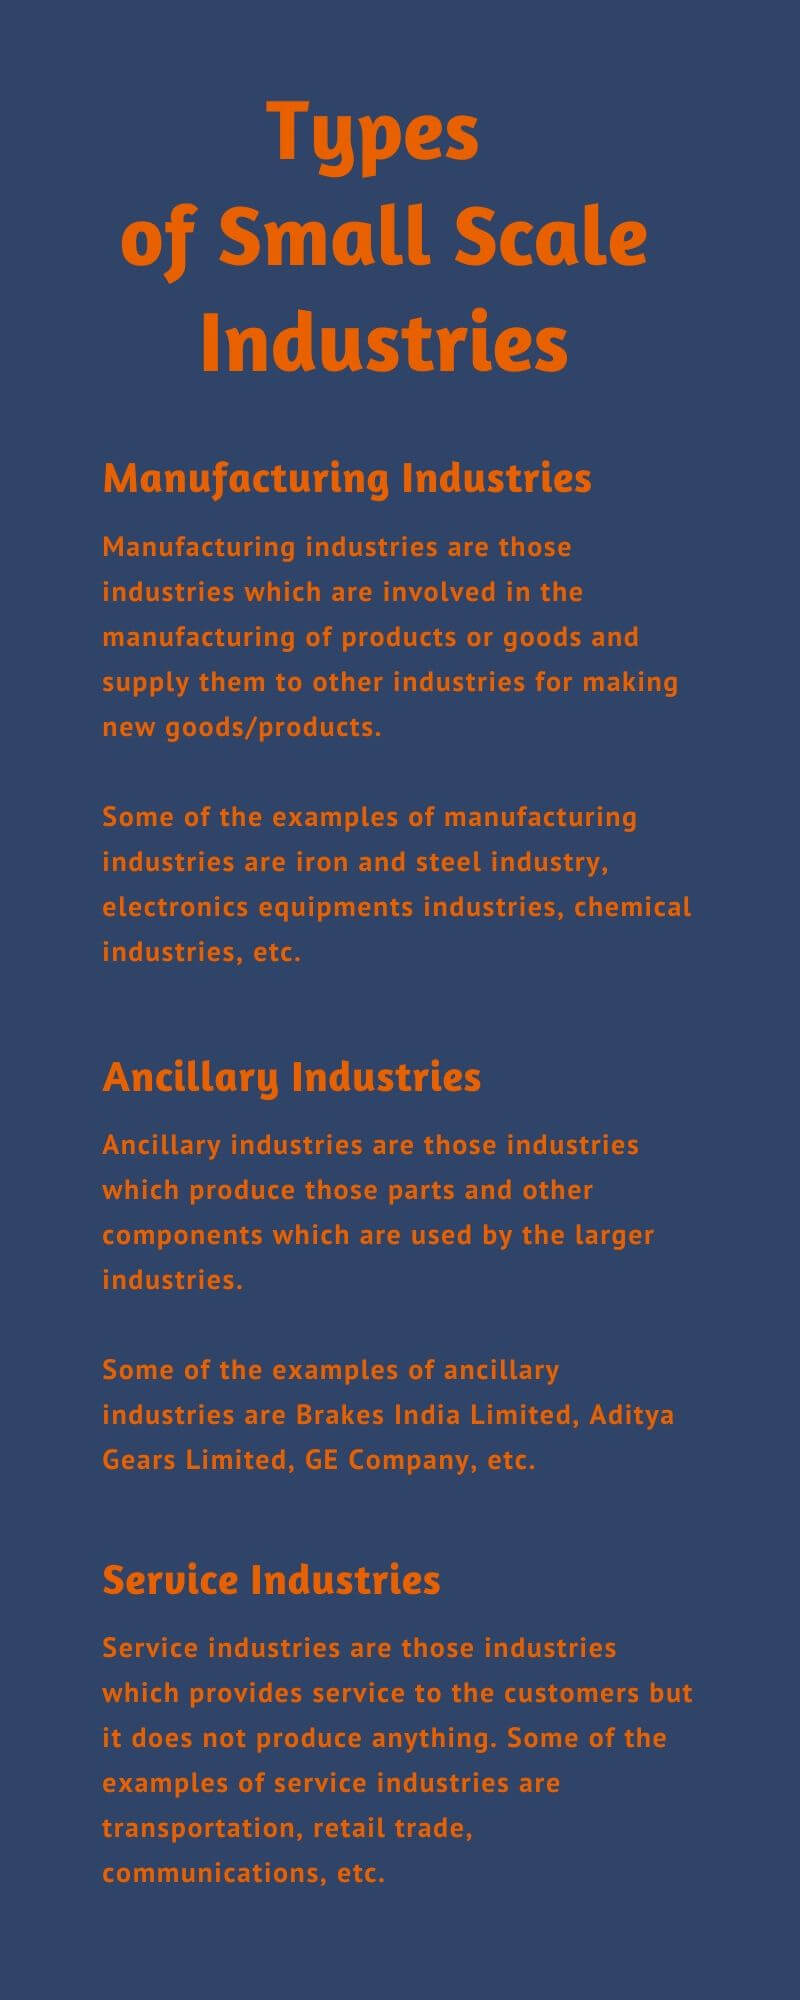 Types of Small Scale Industries